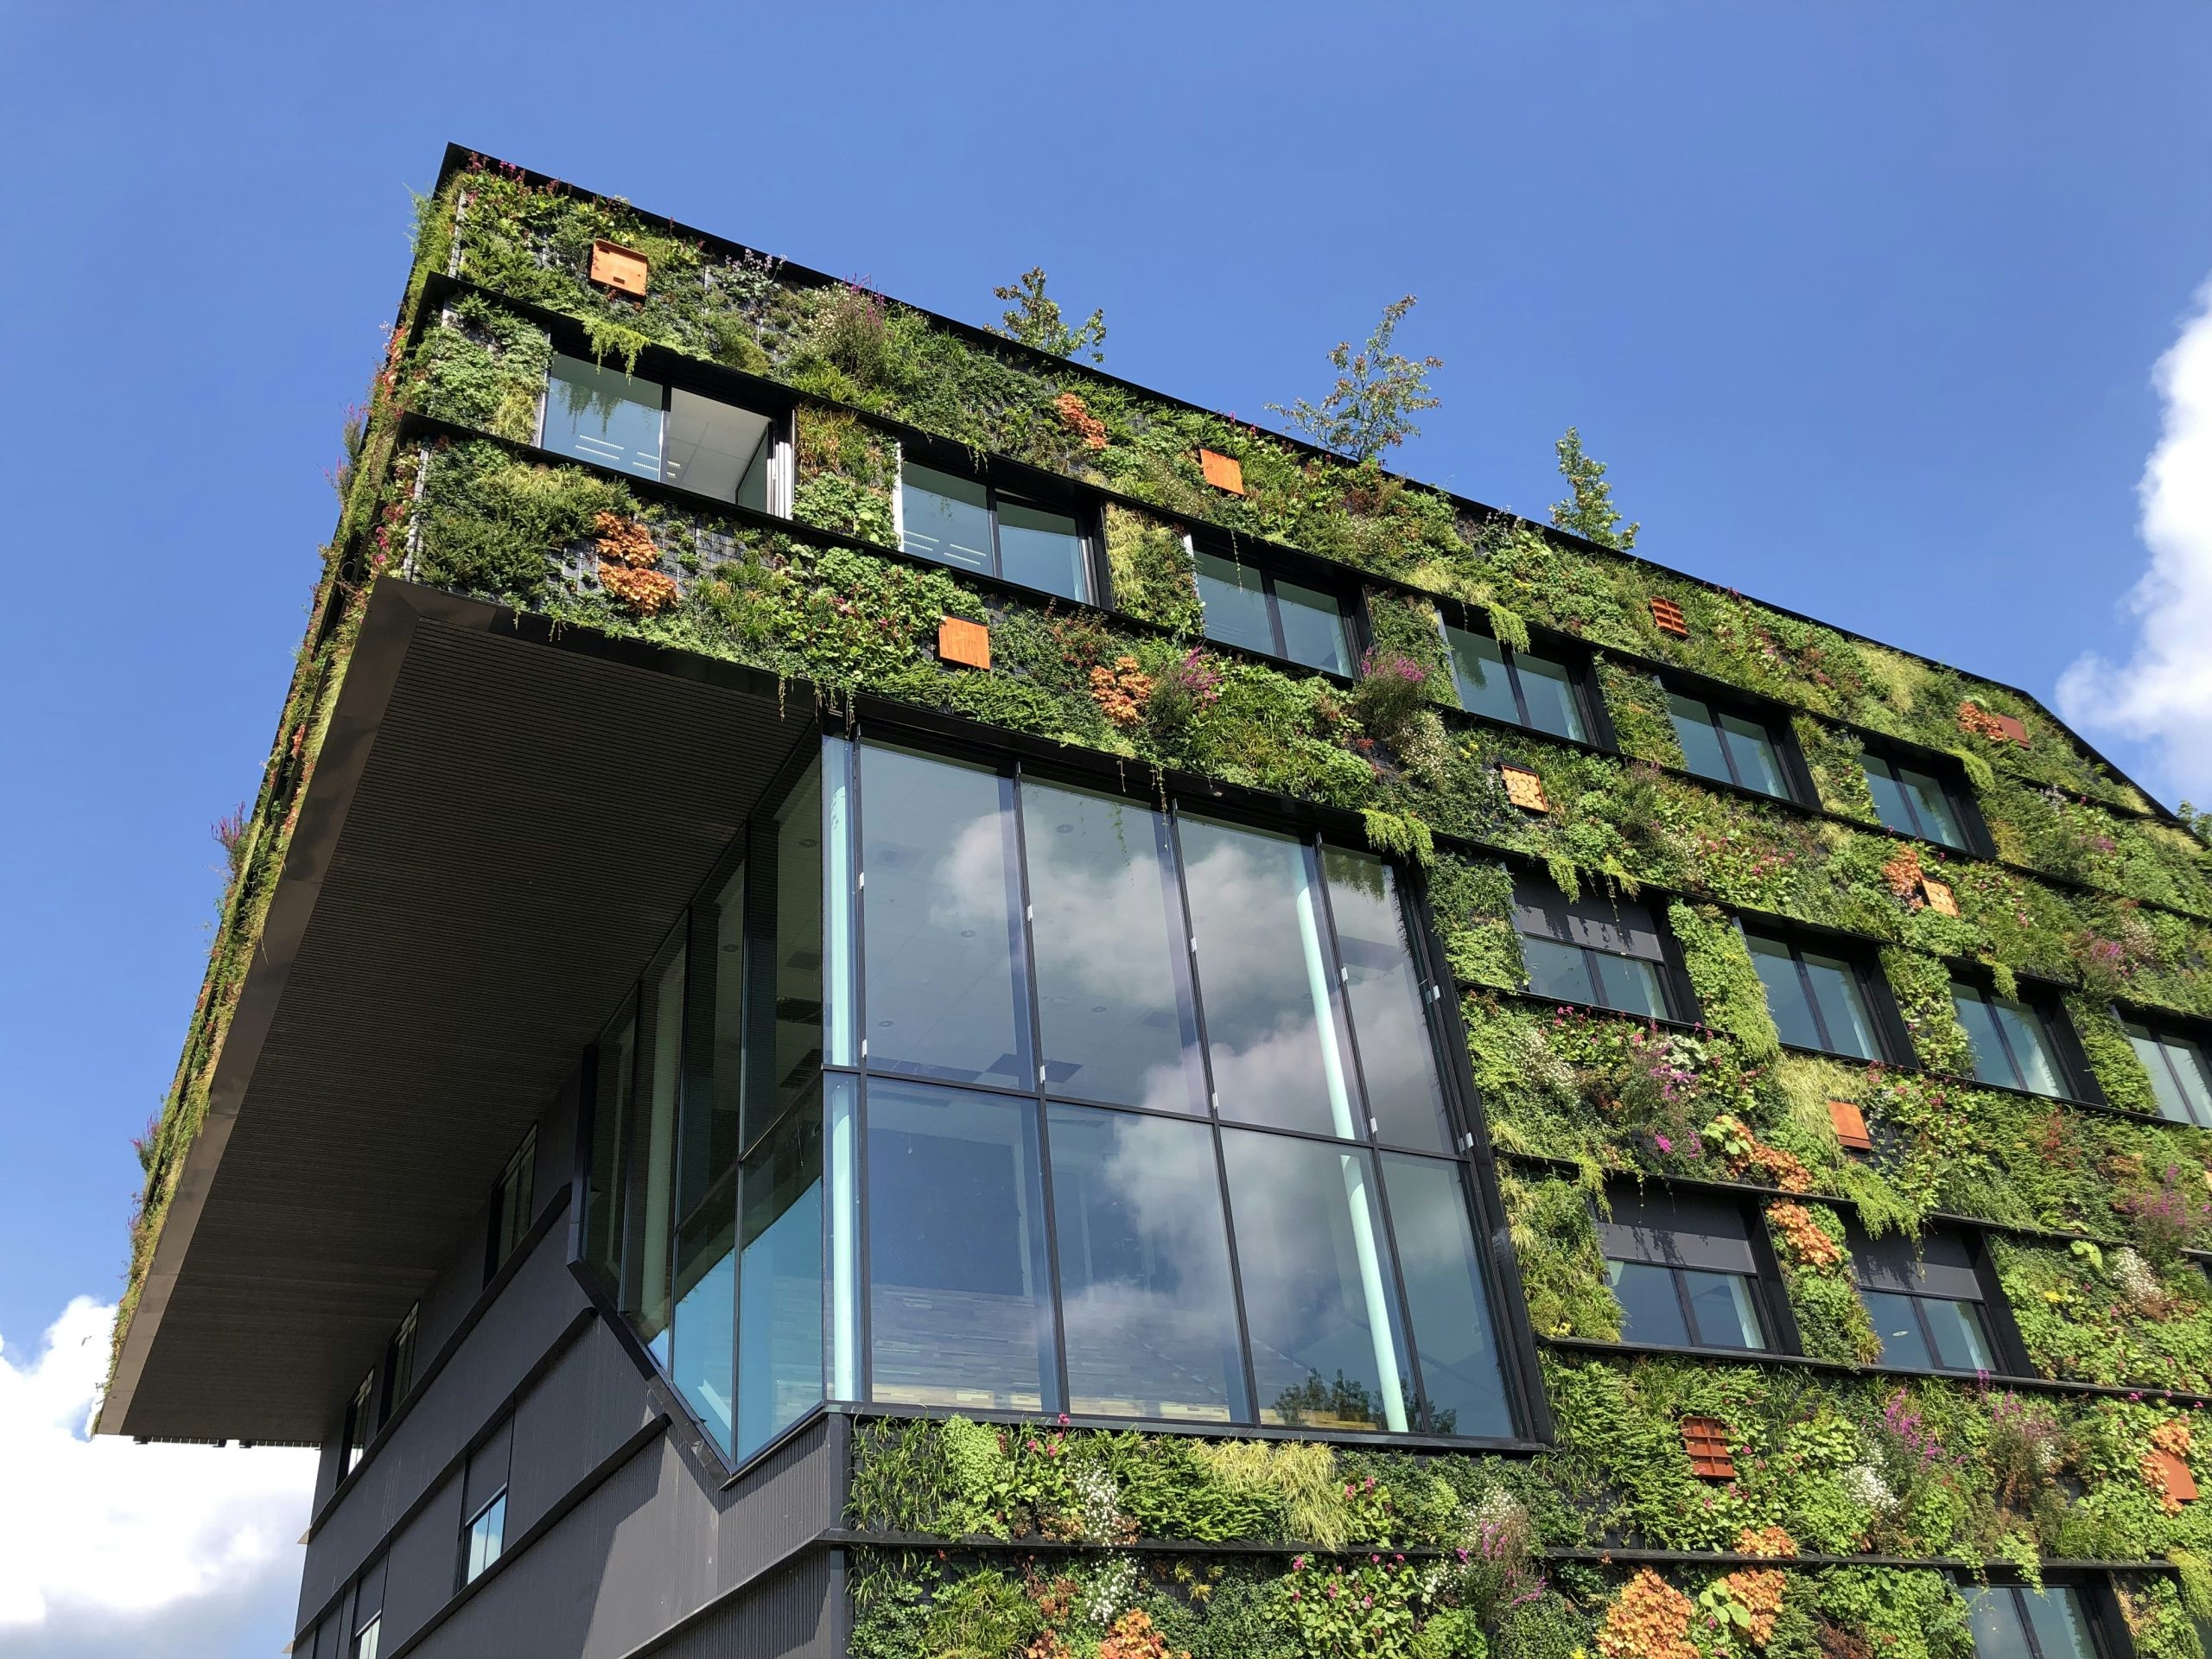 How Does Sustainable Architecture Reduce Carbon Footprint?